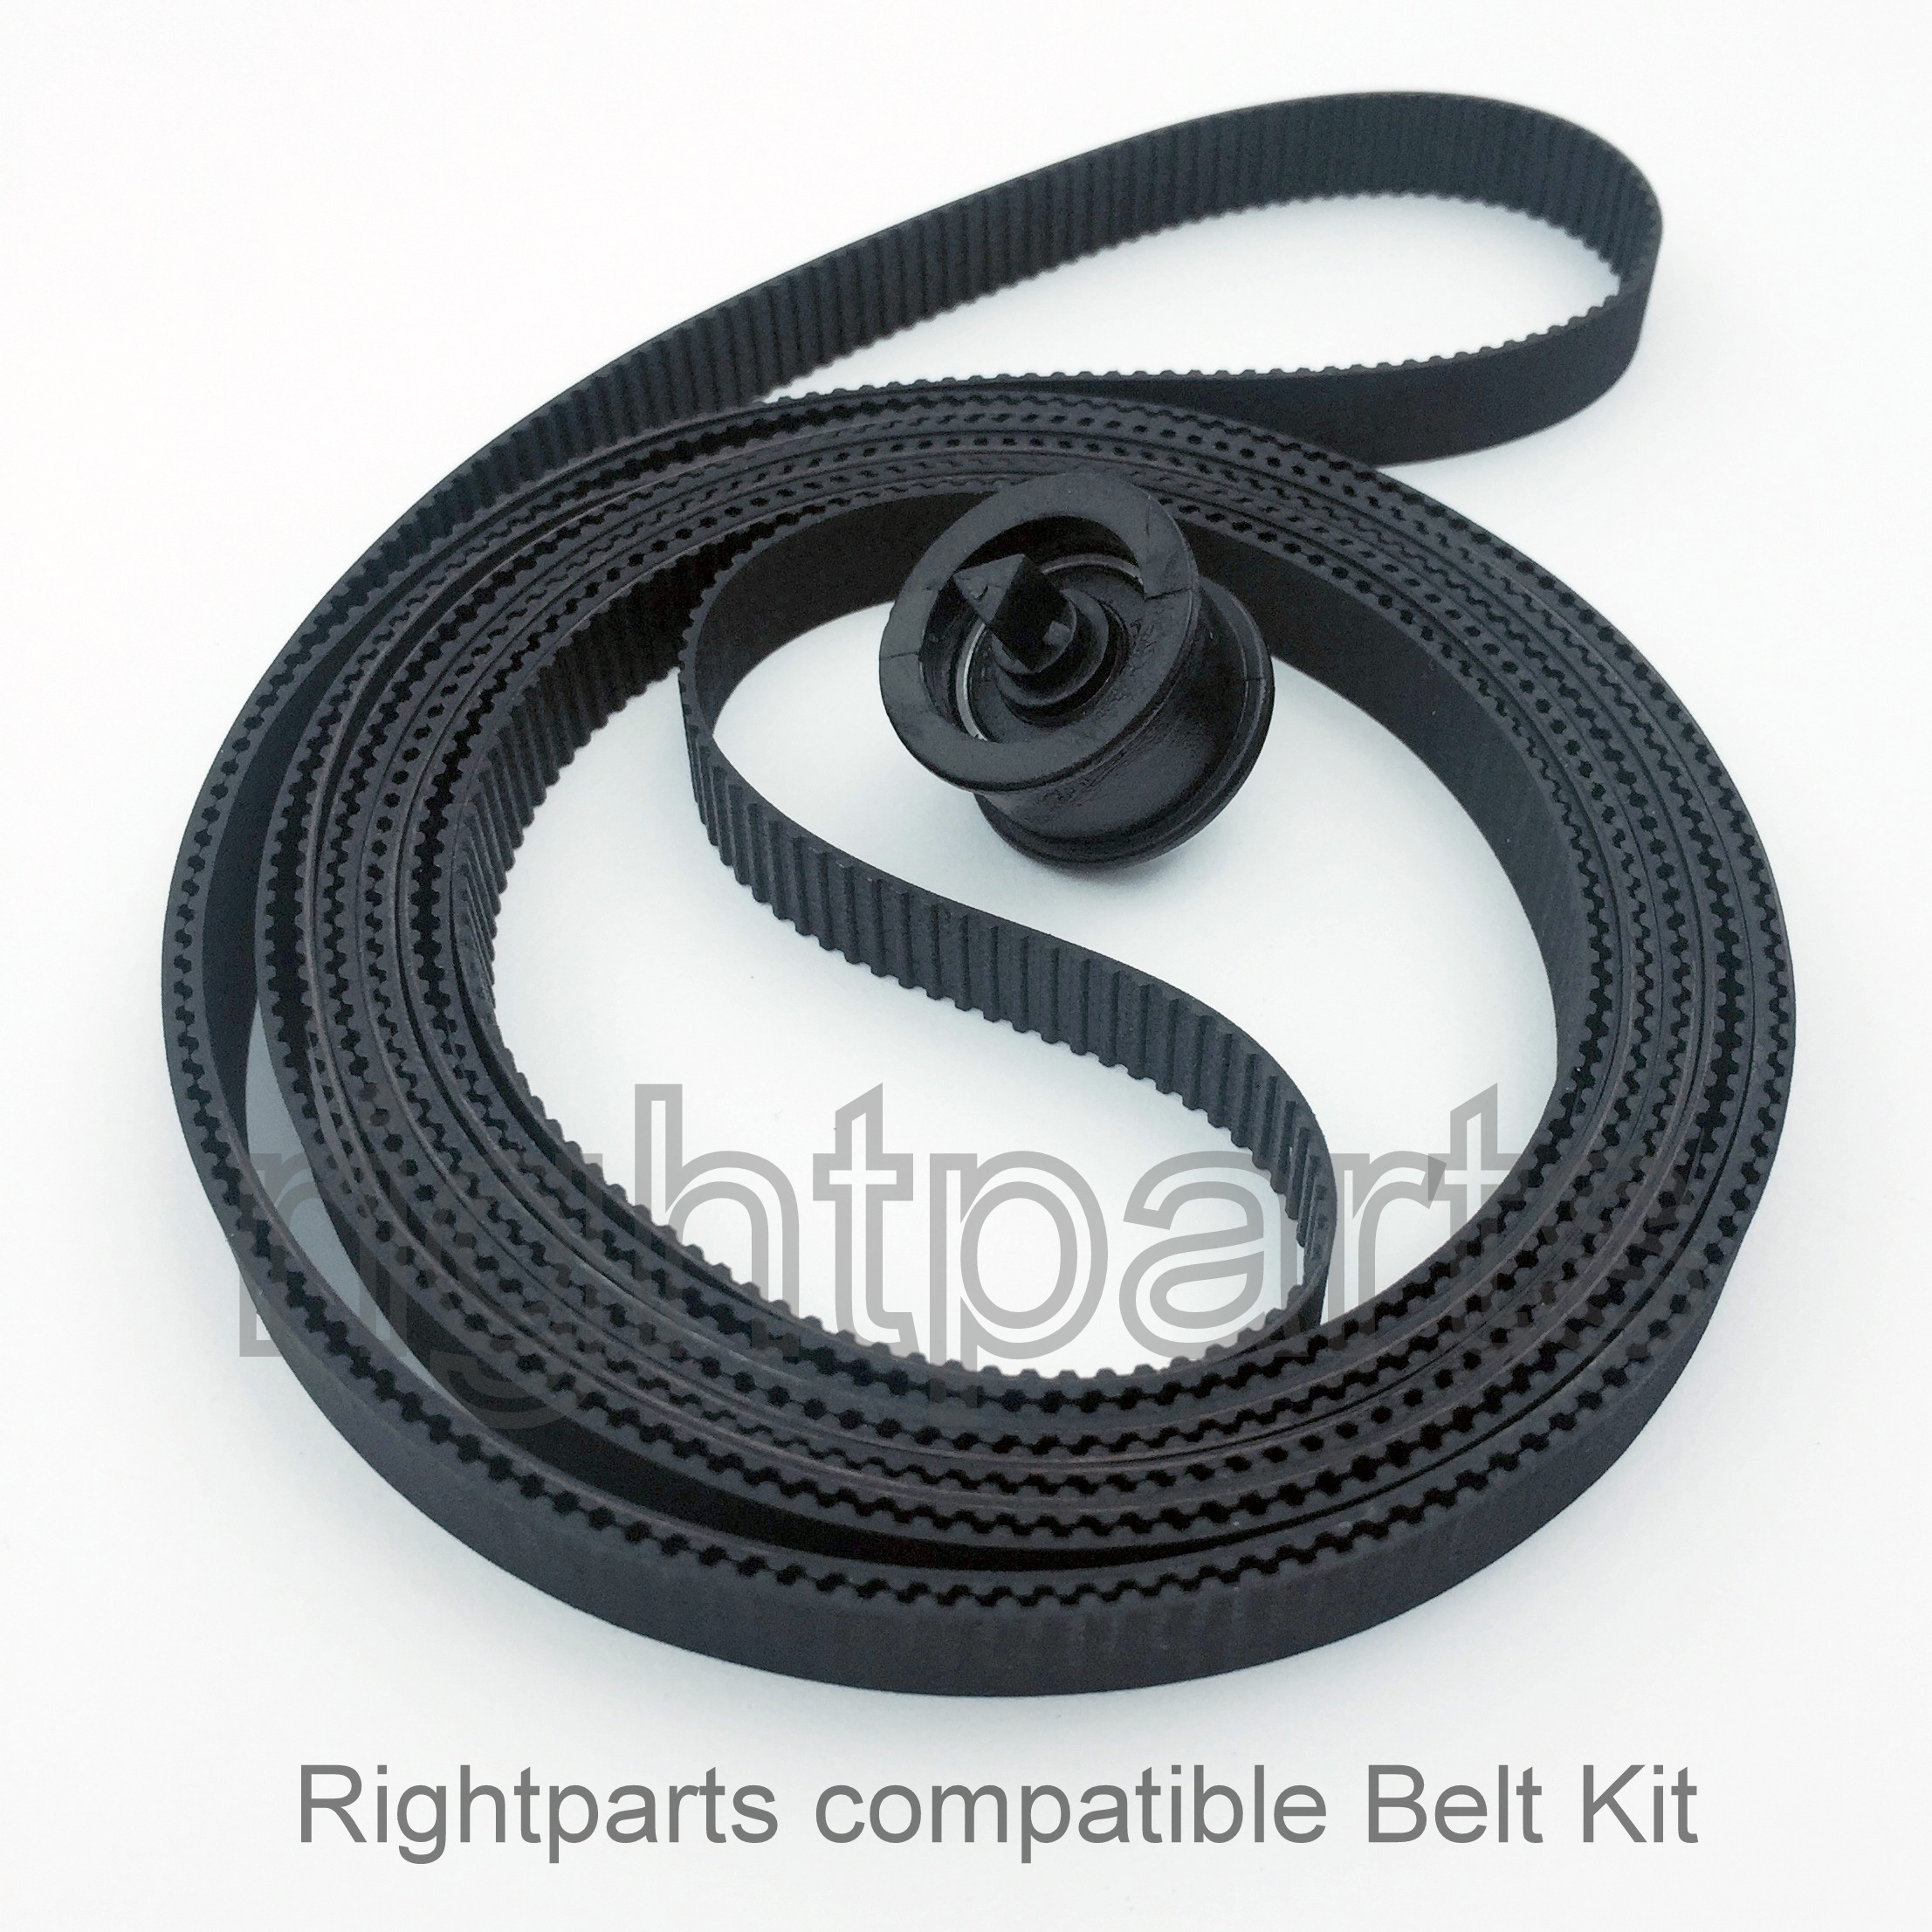 CARRIAGE BELT Carriage Belt C7769-60182 FIT FOR HP DesignJet 500 500ps 510 800 